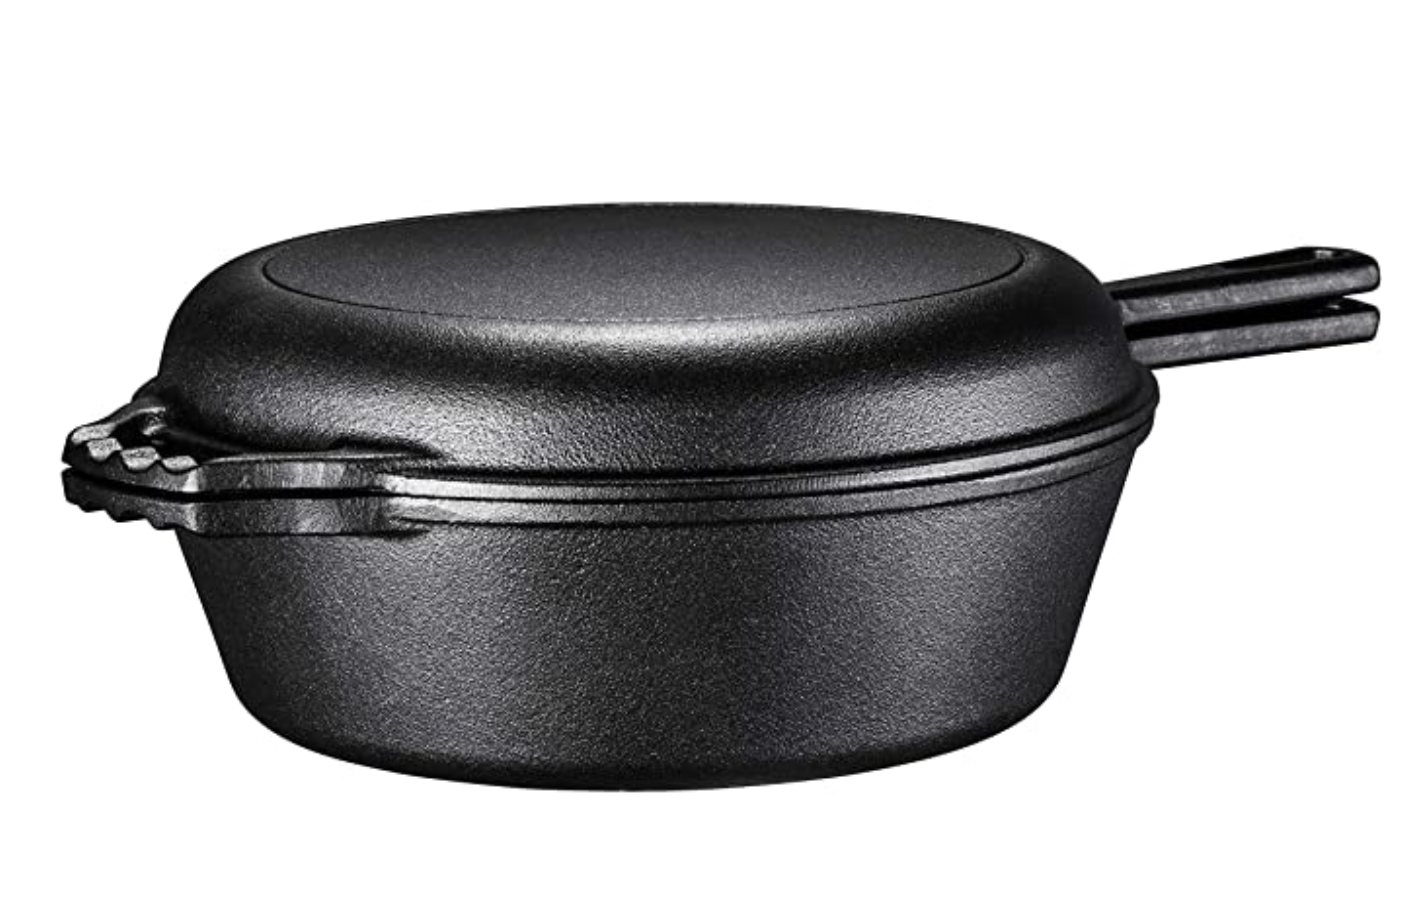 cast iron dutch oven useful gift for vanlifers